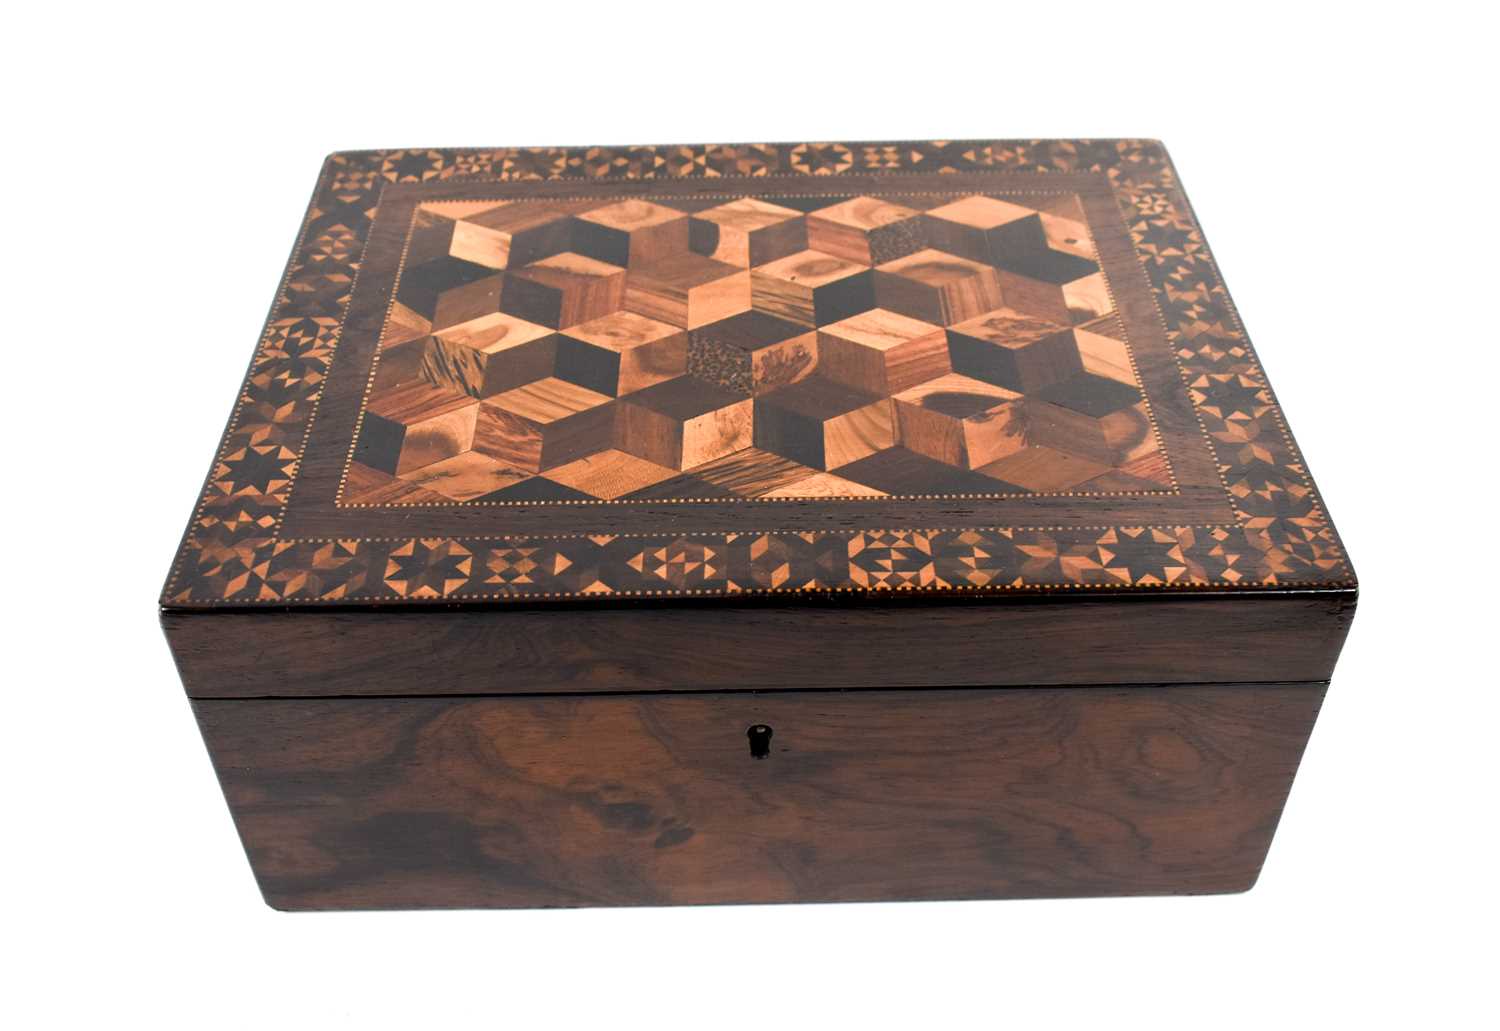 A 19th century rosewood Tunbridge ware work box, the lid with tumbling block design of specimen - Image 2 of 5